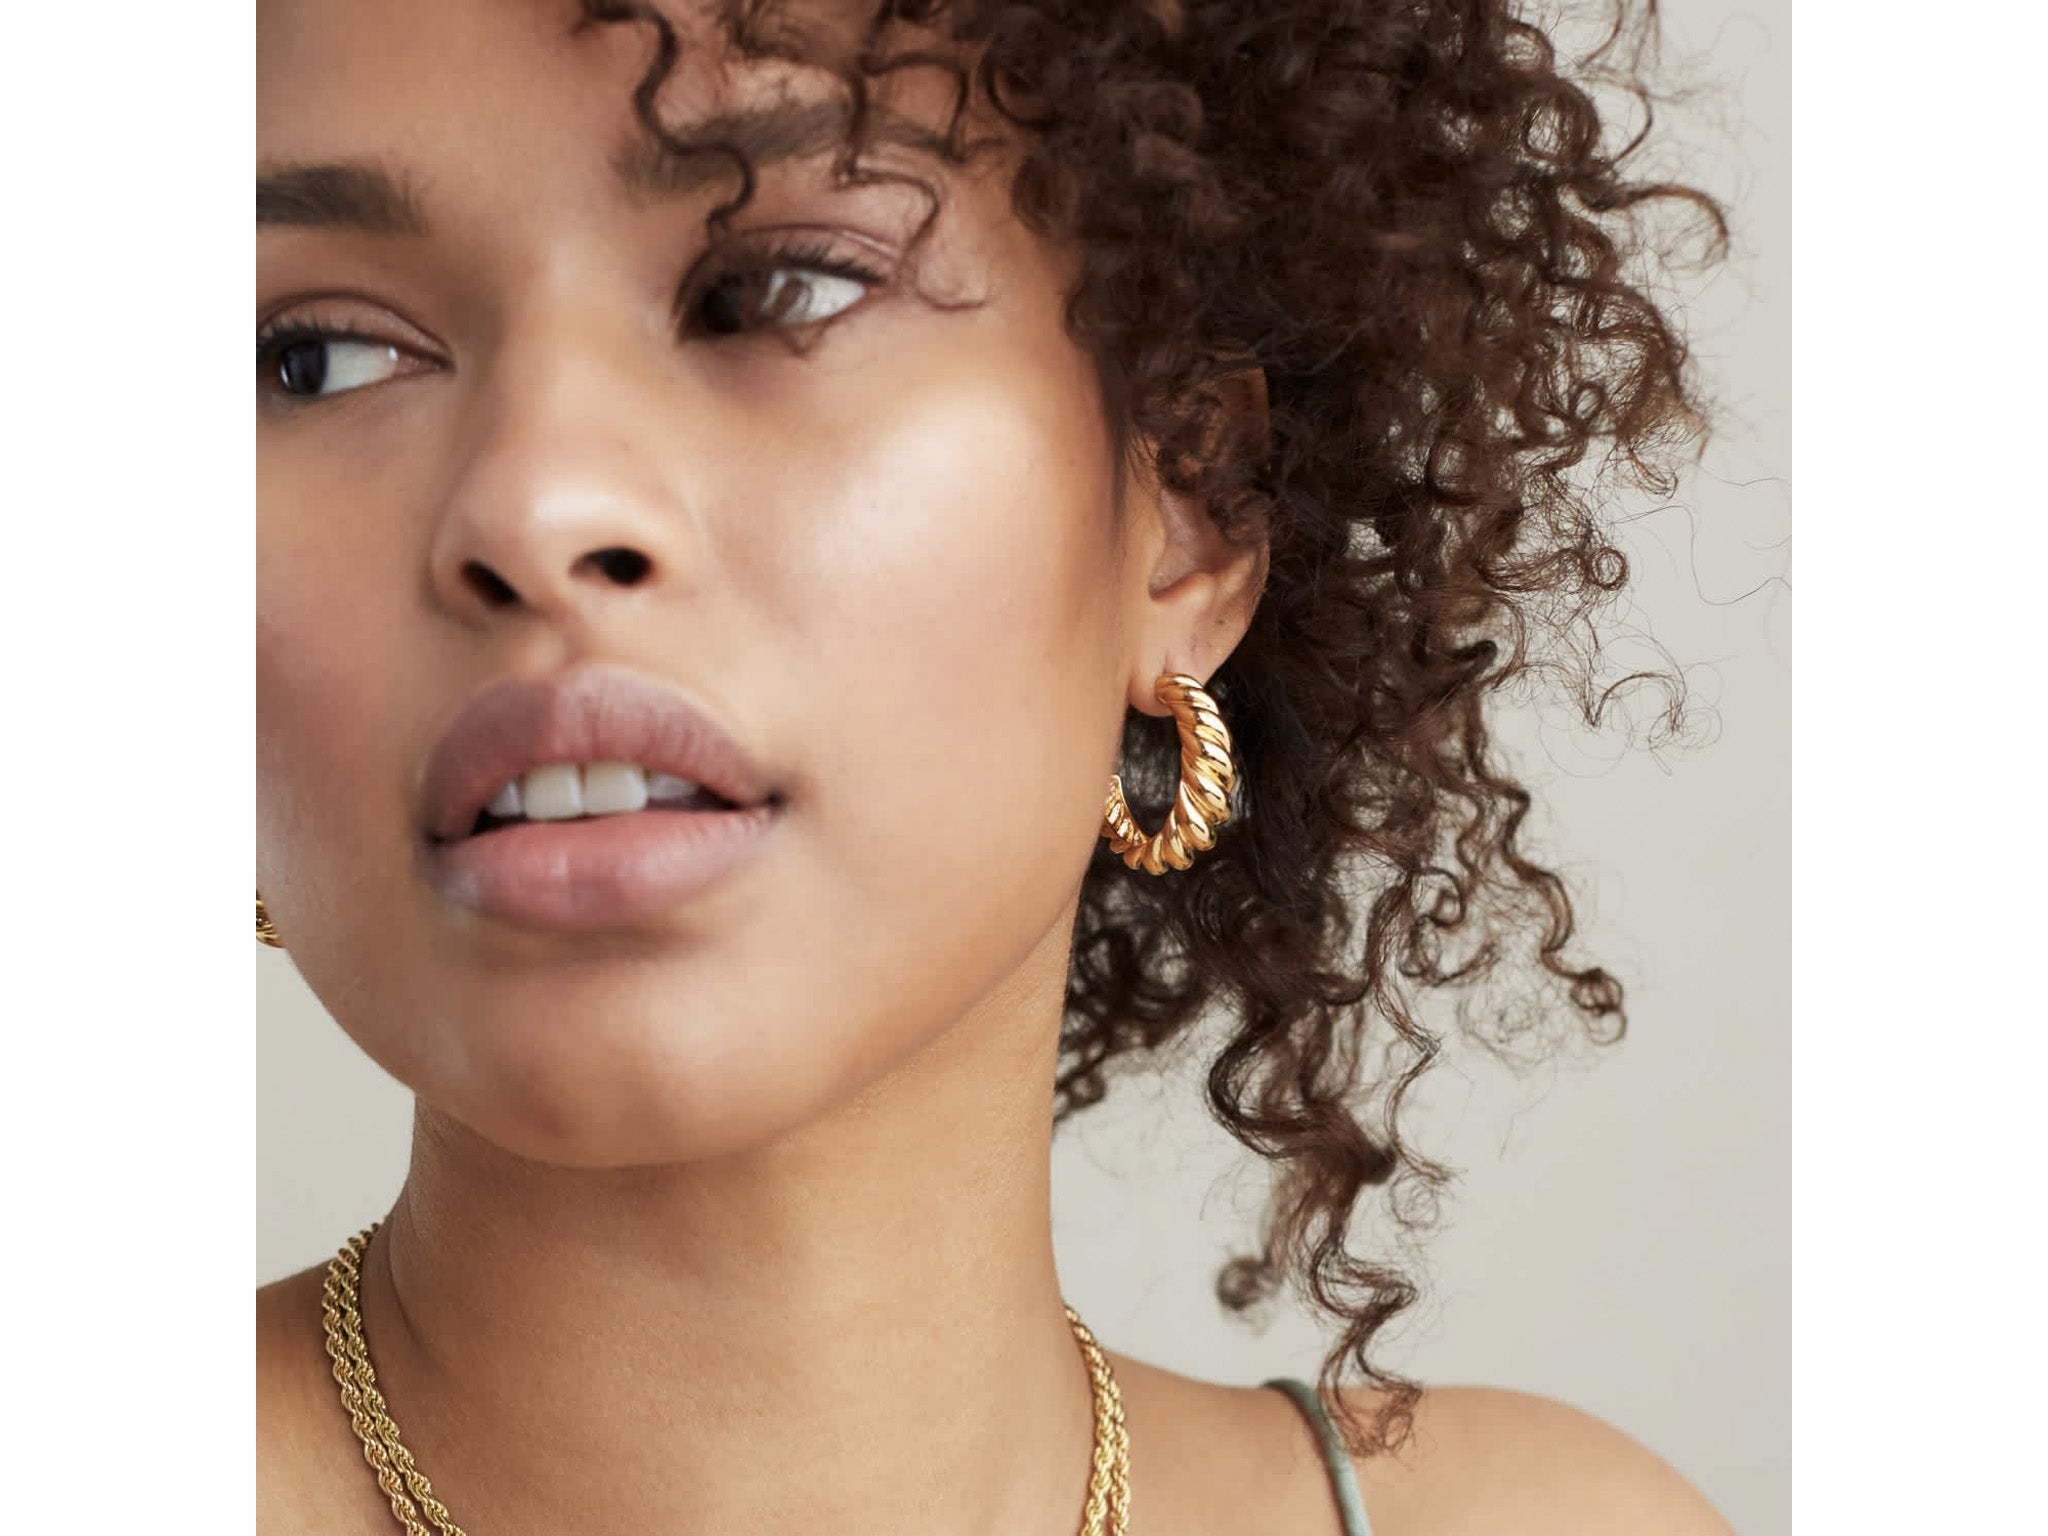 Best gold hoop earrings 2022: From Mejuri's braided style to